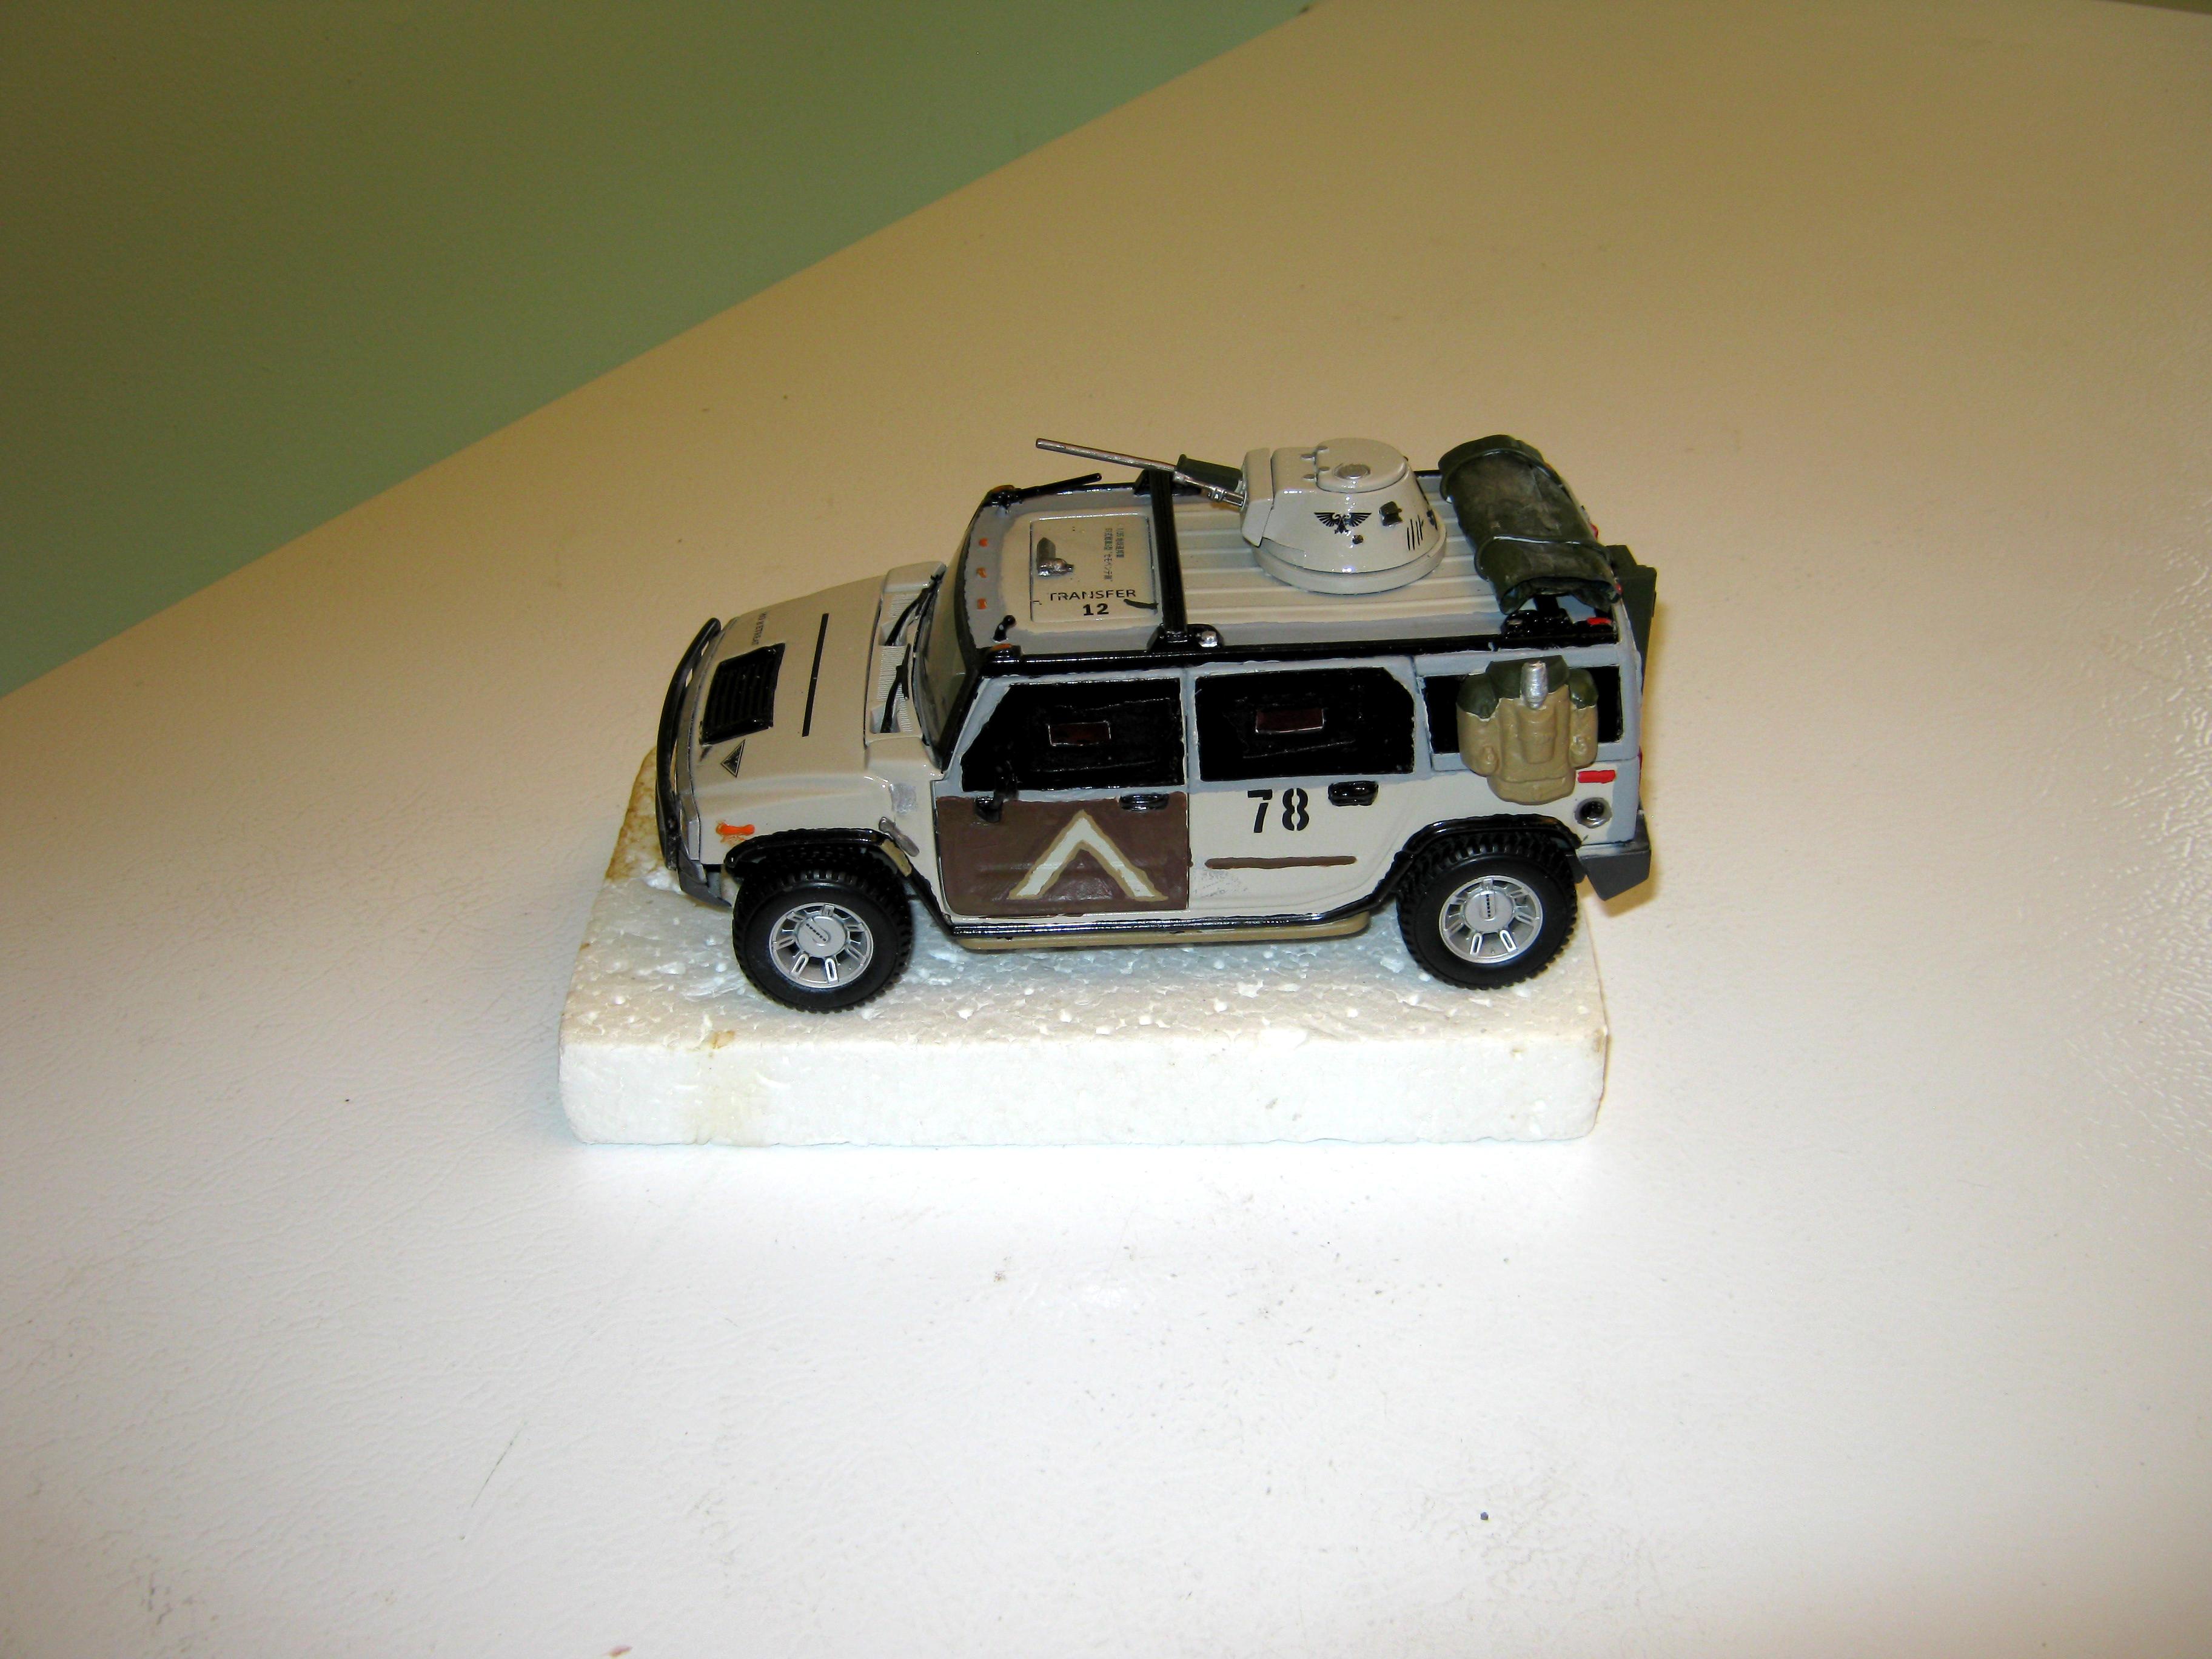 Conversion, Counts As, Die-cast, H2, Hummer, Humvee, Imperial, Transport, Truck